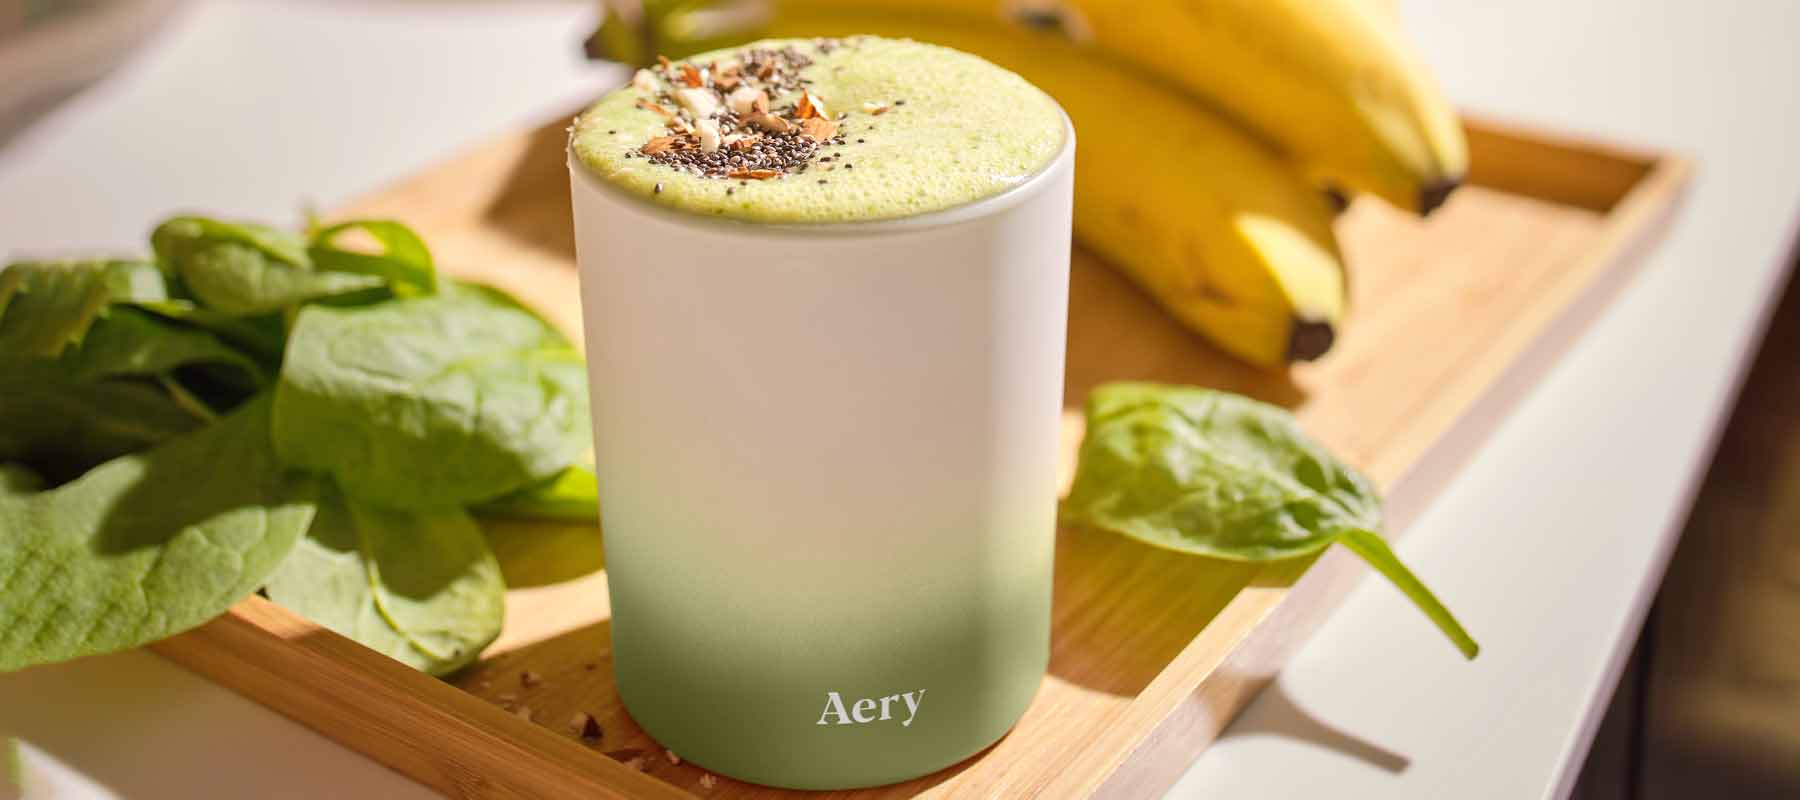 Banana Apple and Kale Smoothie